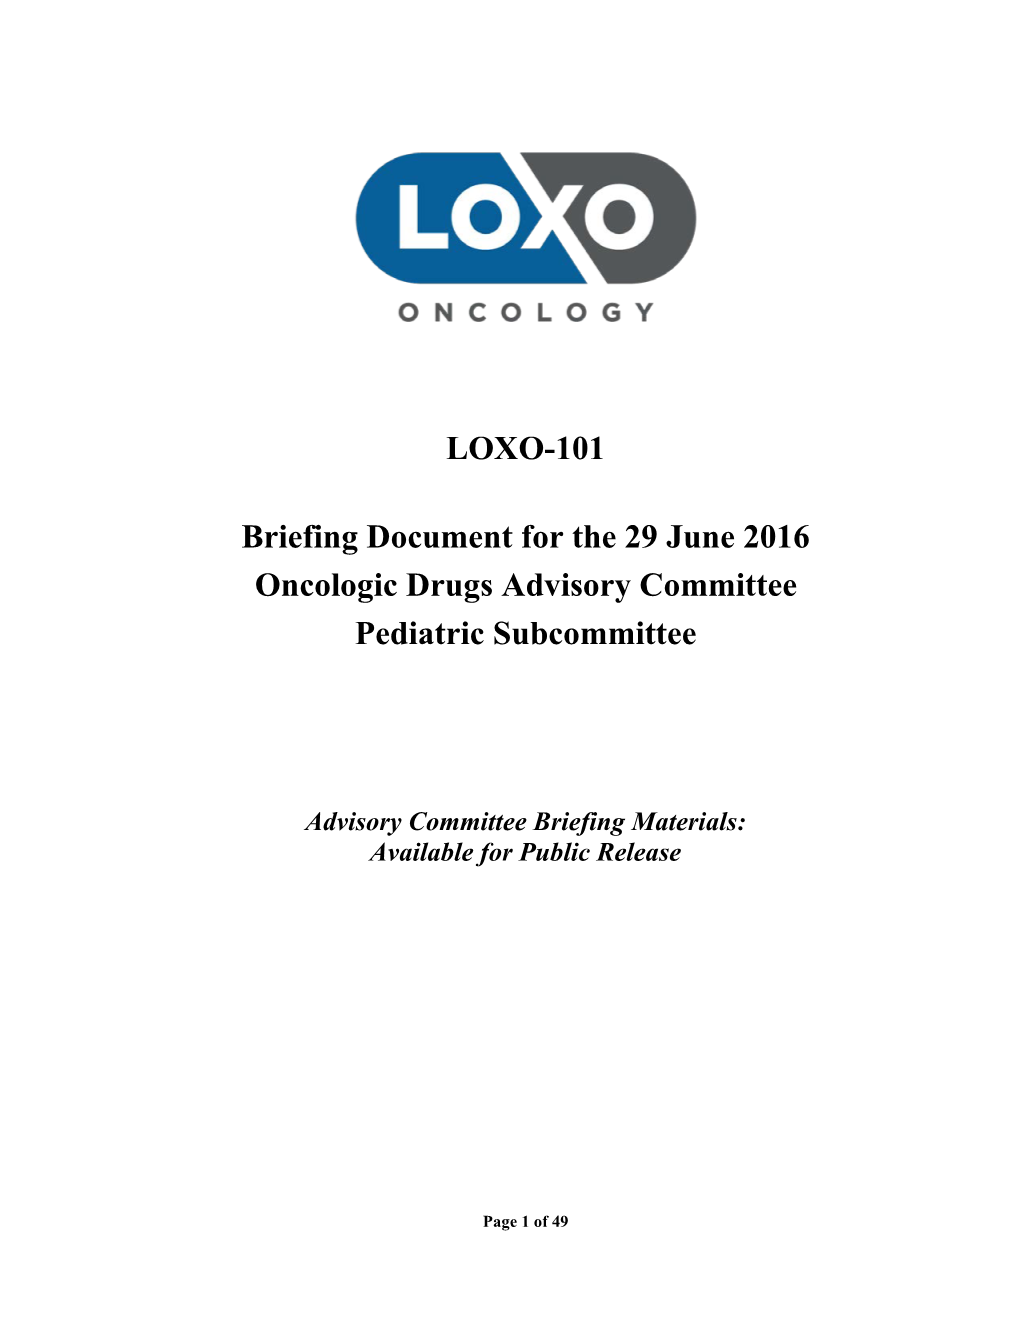 LOXO-101 Briefing Document for the 29 June 2016 Oncologic Drugs